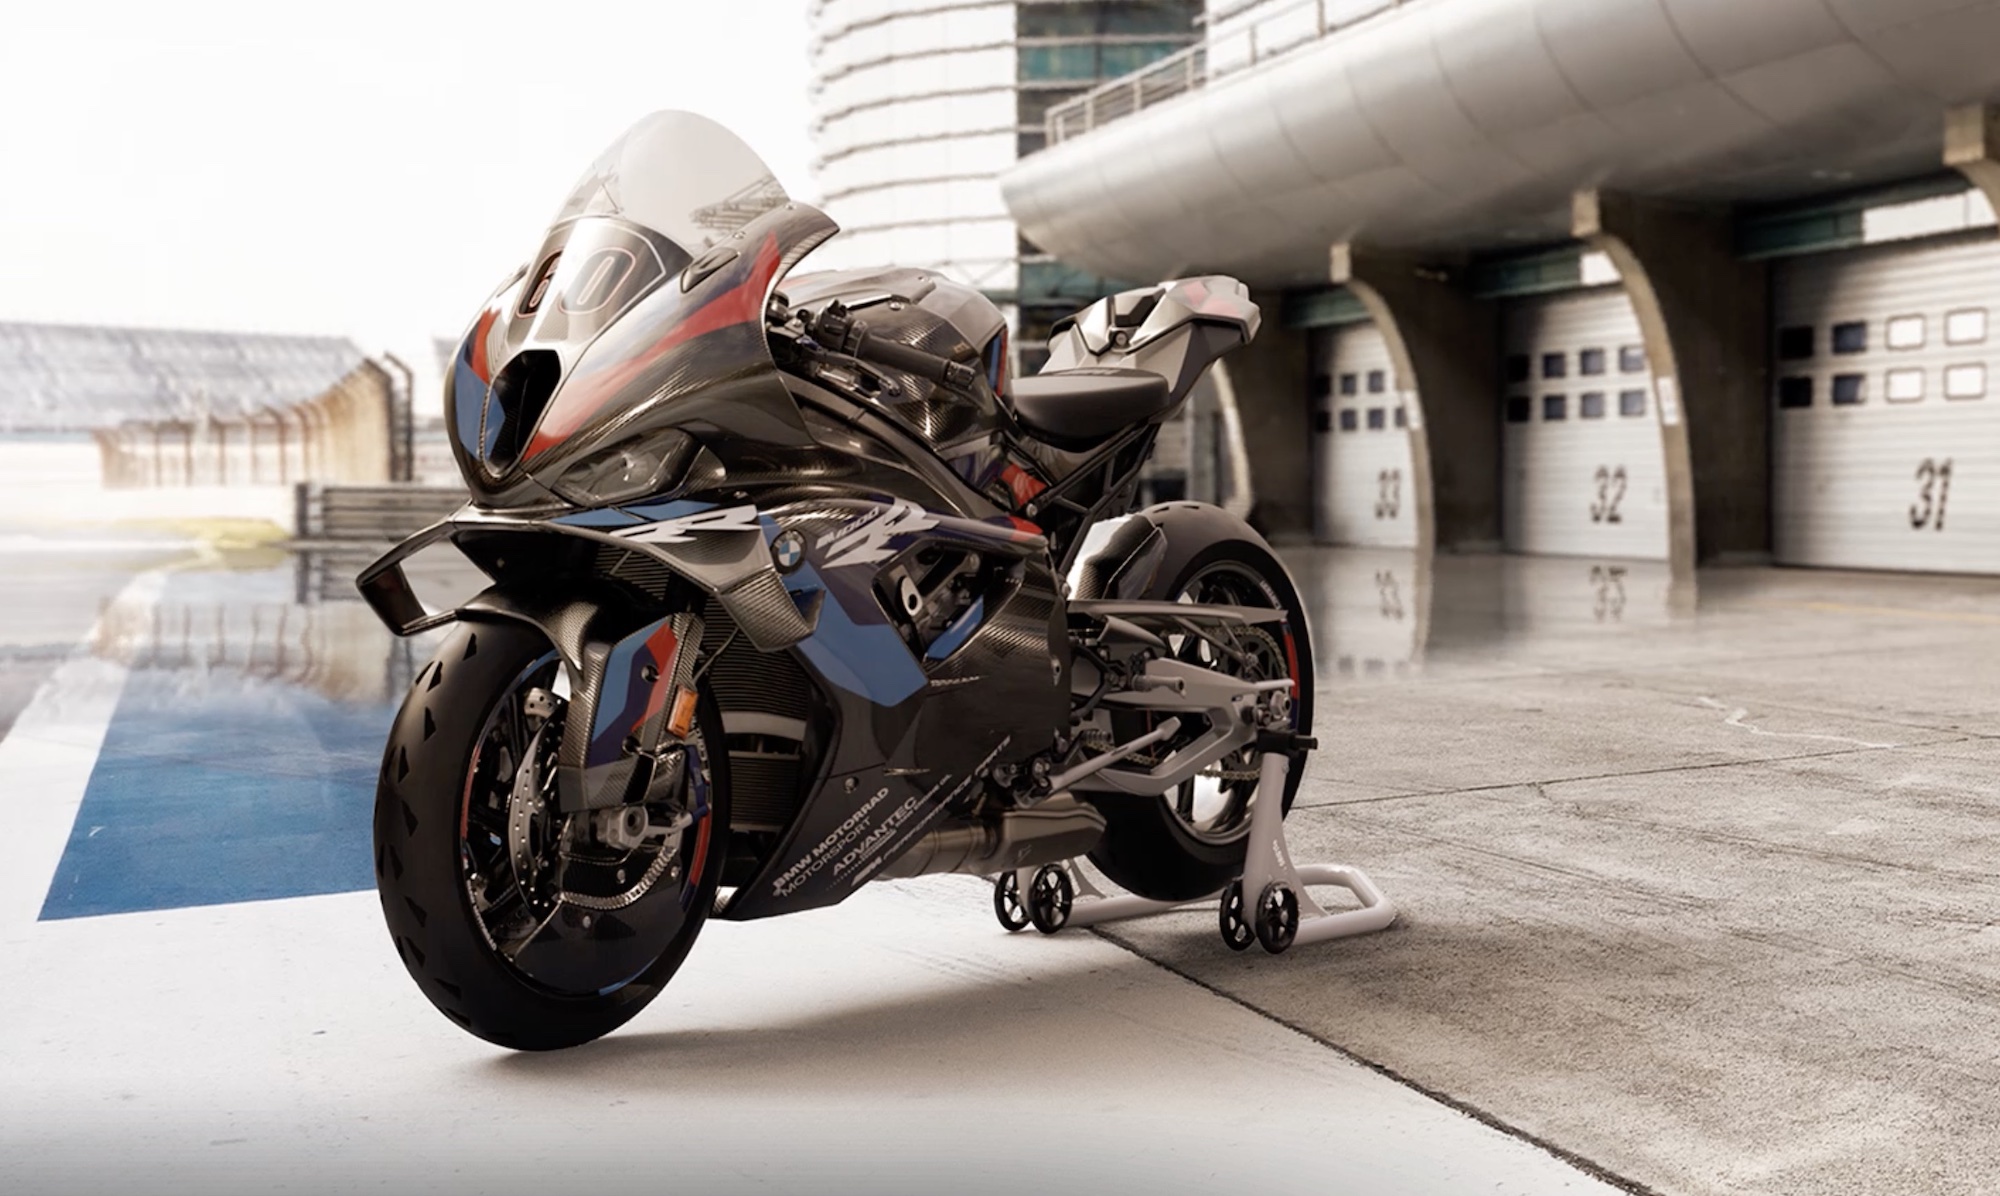 BMW's M 1000 RR. Media sourced from BMW.